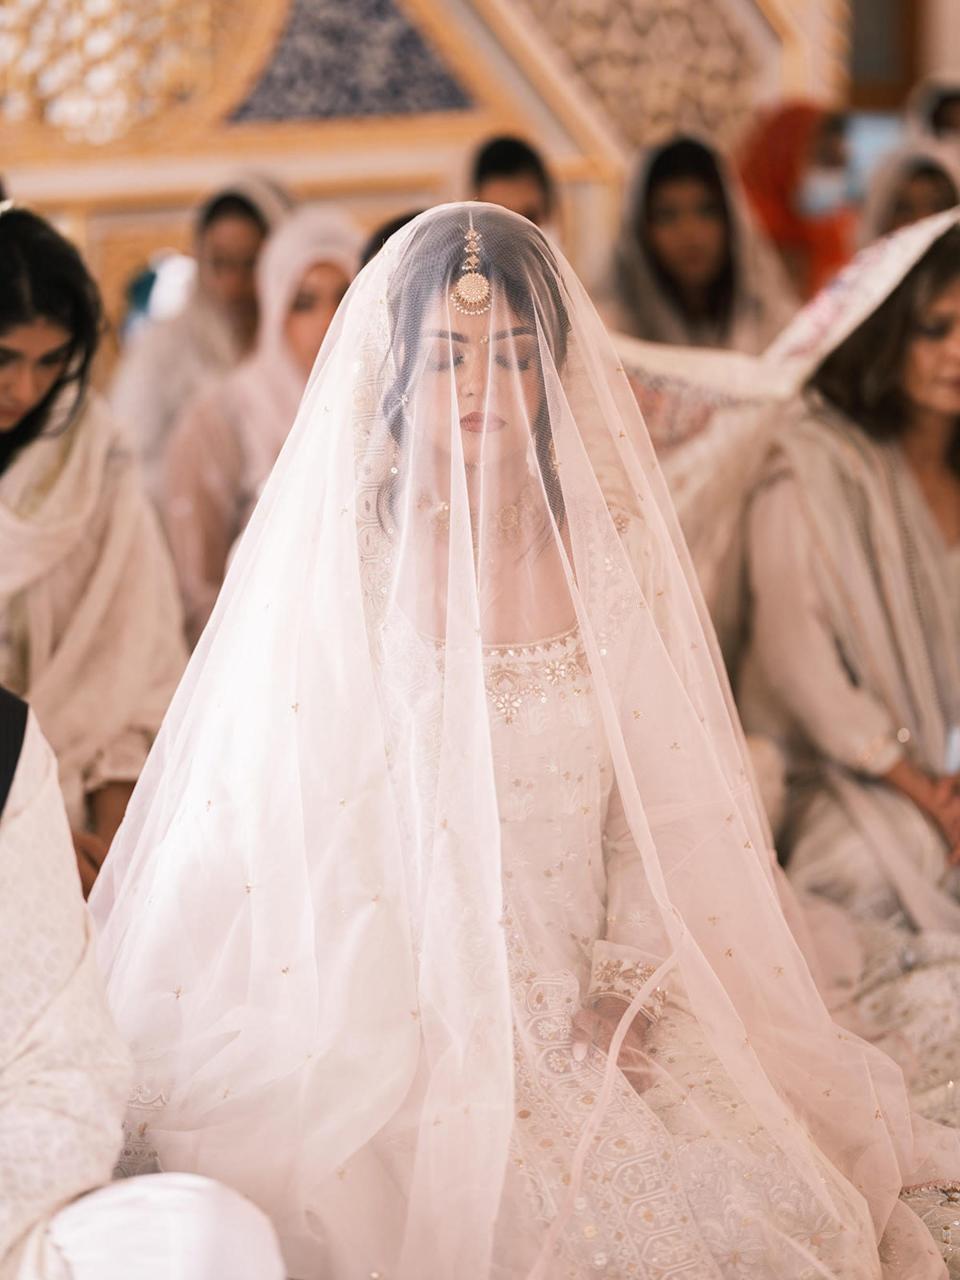 A bride closes her eyes during her wedding ceremony. A veil partially obscures her face.